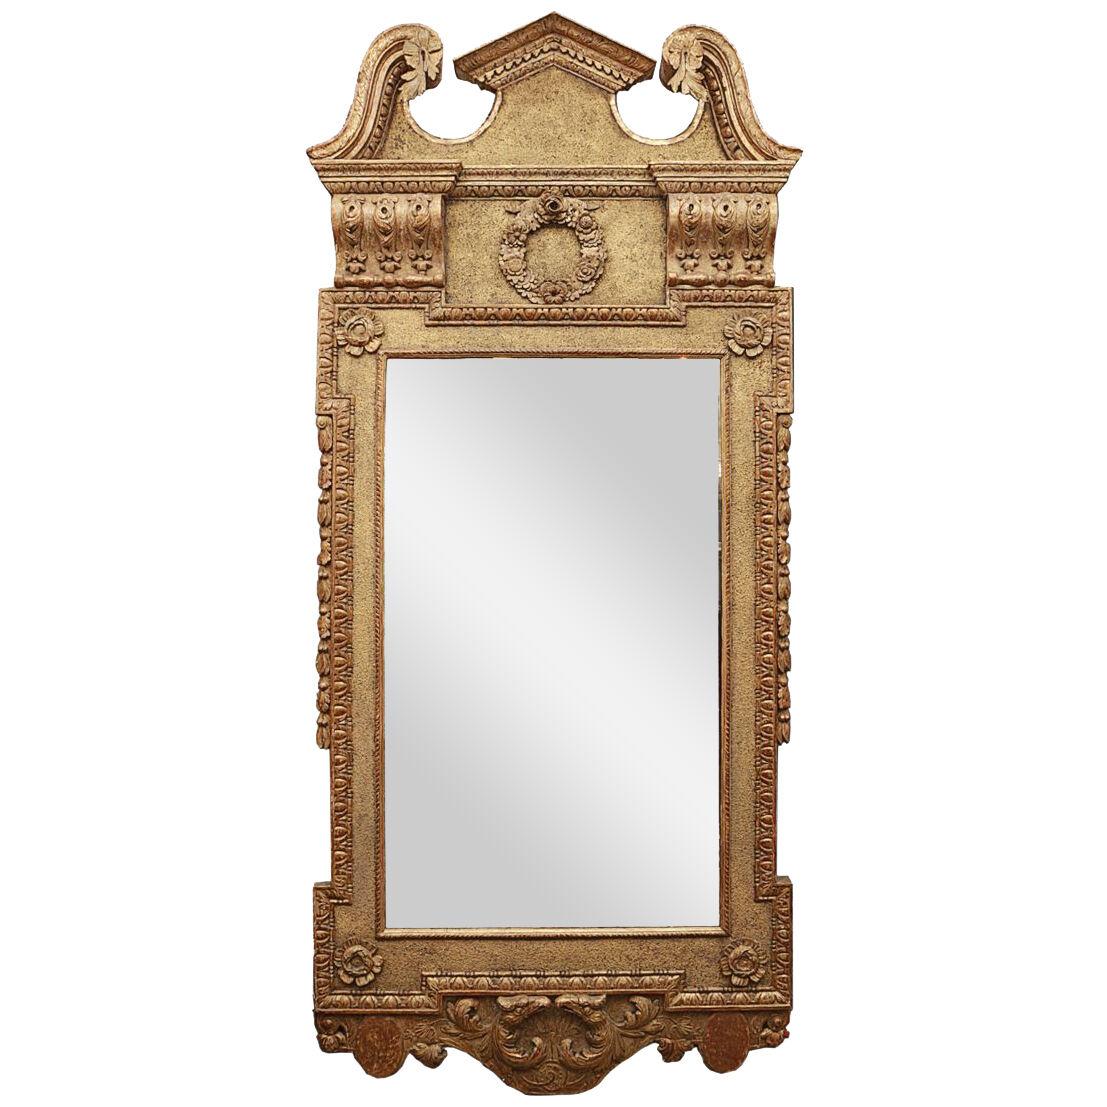 18th Century Large Giltwood Pier Mirror with Swan Neck Pediment